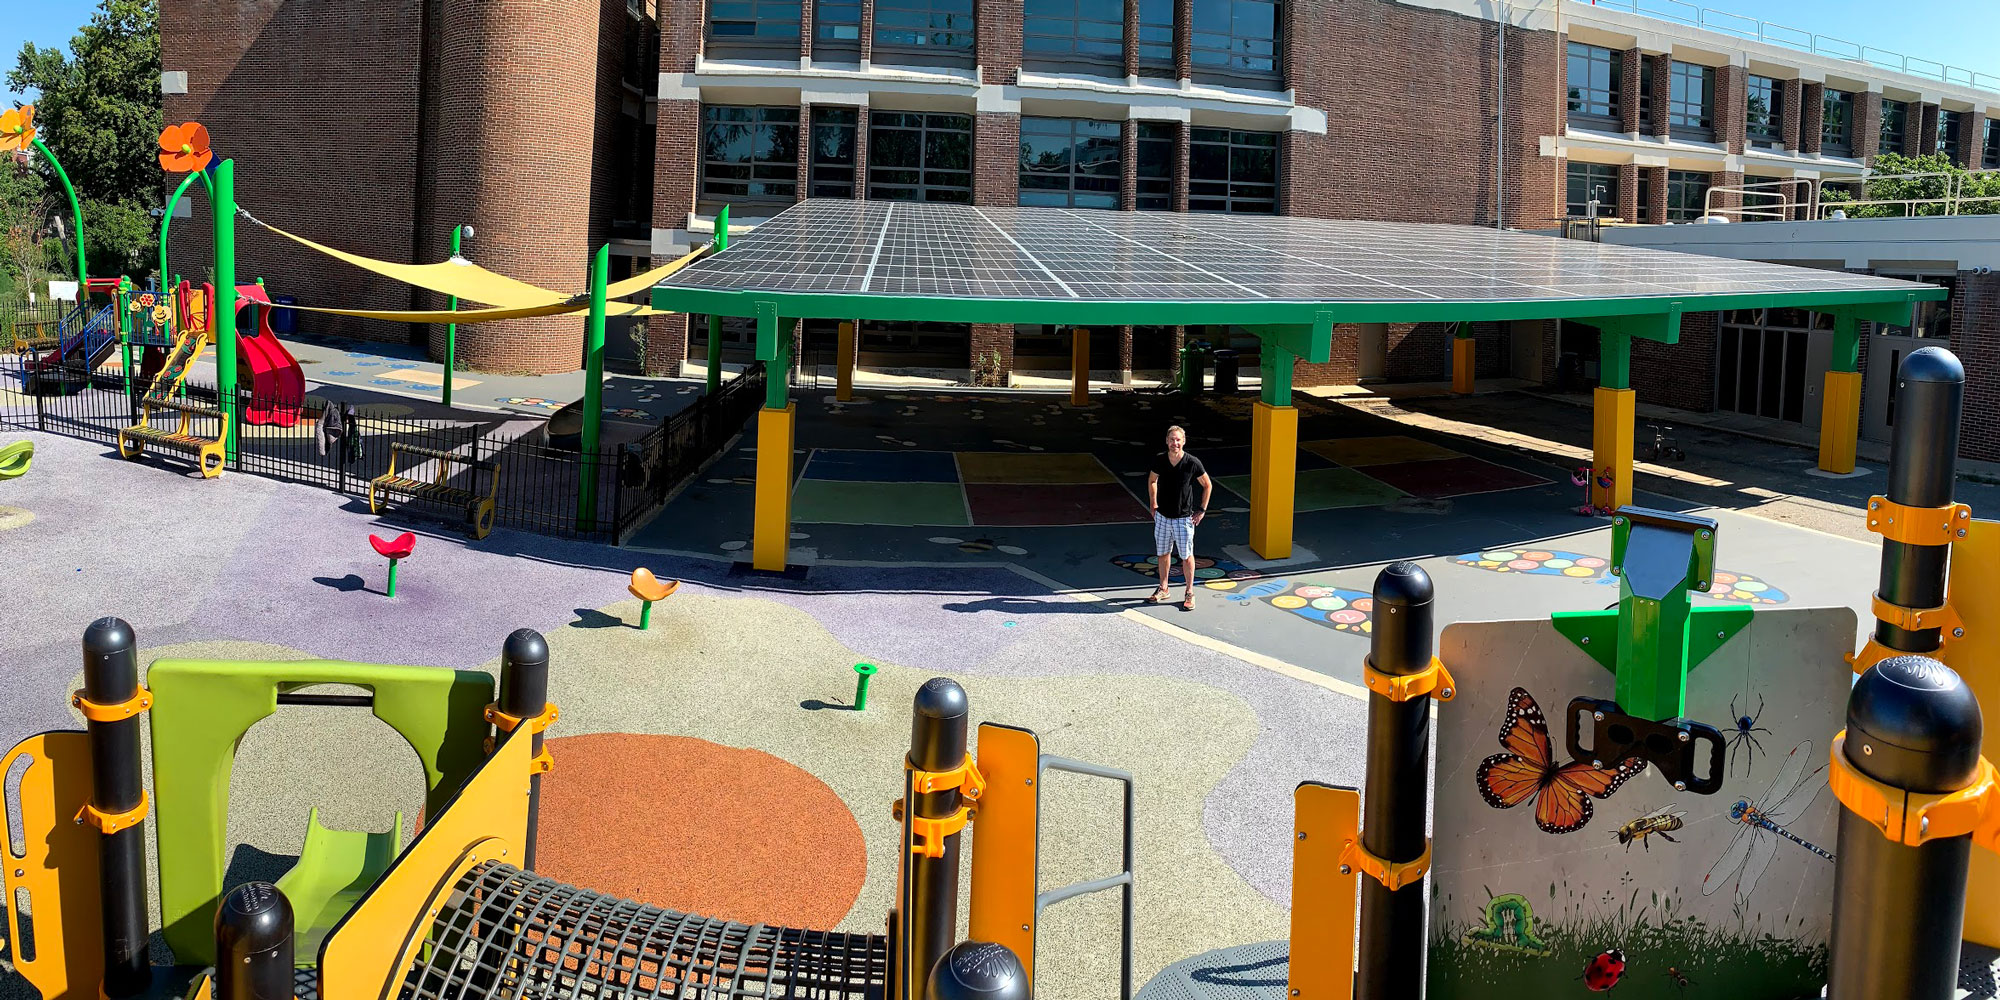 A person is standing outside of Ludlow-Taylor Elementary School. The school is a brick building with glass panes surrounded by trees and a bright, clear, sky. There is a bright playground structure with an illustration of insects on it. Left of the person is a series of flower-like playground structures staggered to look like a flower blooming. Beneath them is an illustration on the concrete resembling the sun with round edges instead of pointed rays. Behind the structures is a tarp covered area with a short metal fence. Behind the person and to the right of the tarp covered area are two four square areas which are covered by a large, bright solar panel area acting as a roof. To the right of the person are colorful illustrations on the ground designed to look like two curvy stone pathway.